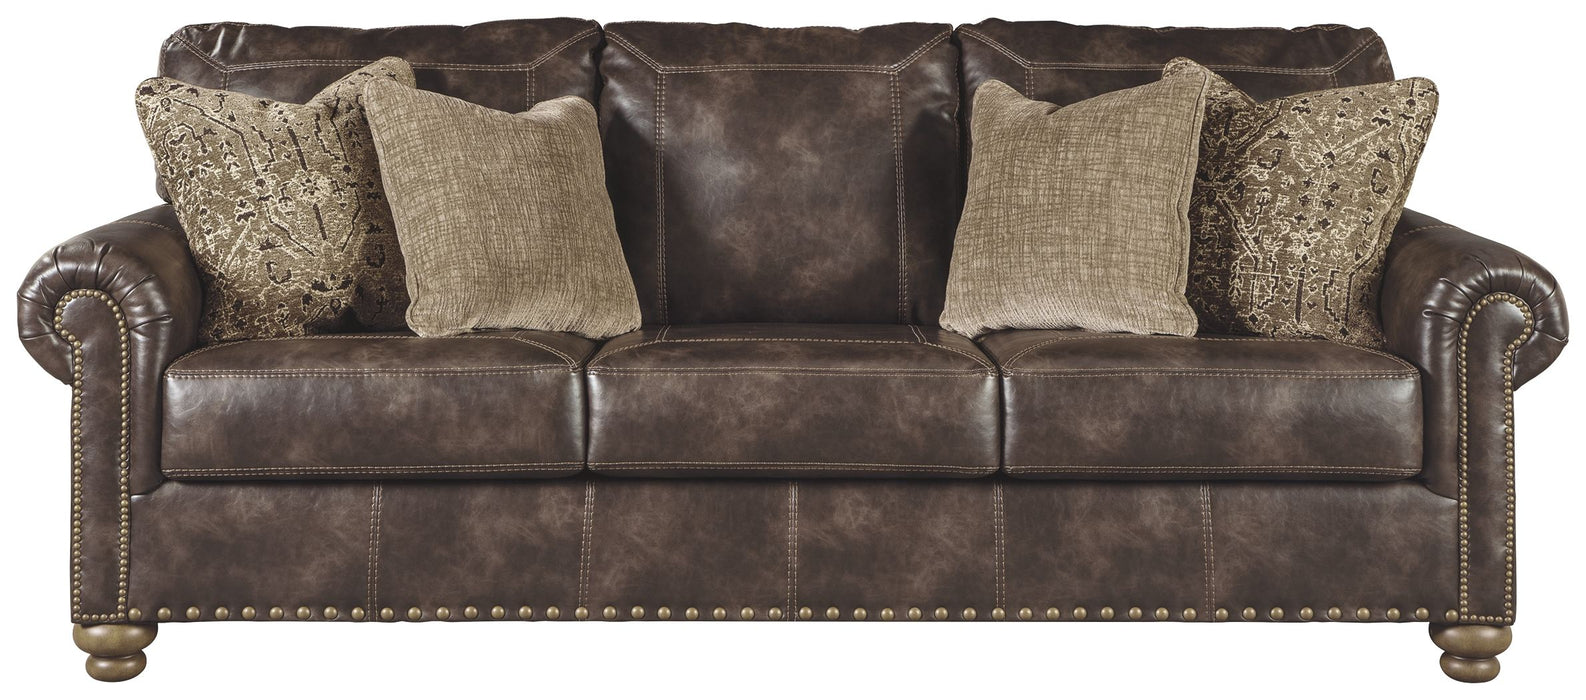 Nicorvo - Coffee - Sofa Cleveland Home Outlet (OH) - Furniture Store in Middleburg Heights Serving Cleveland, Strongsville, and Online